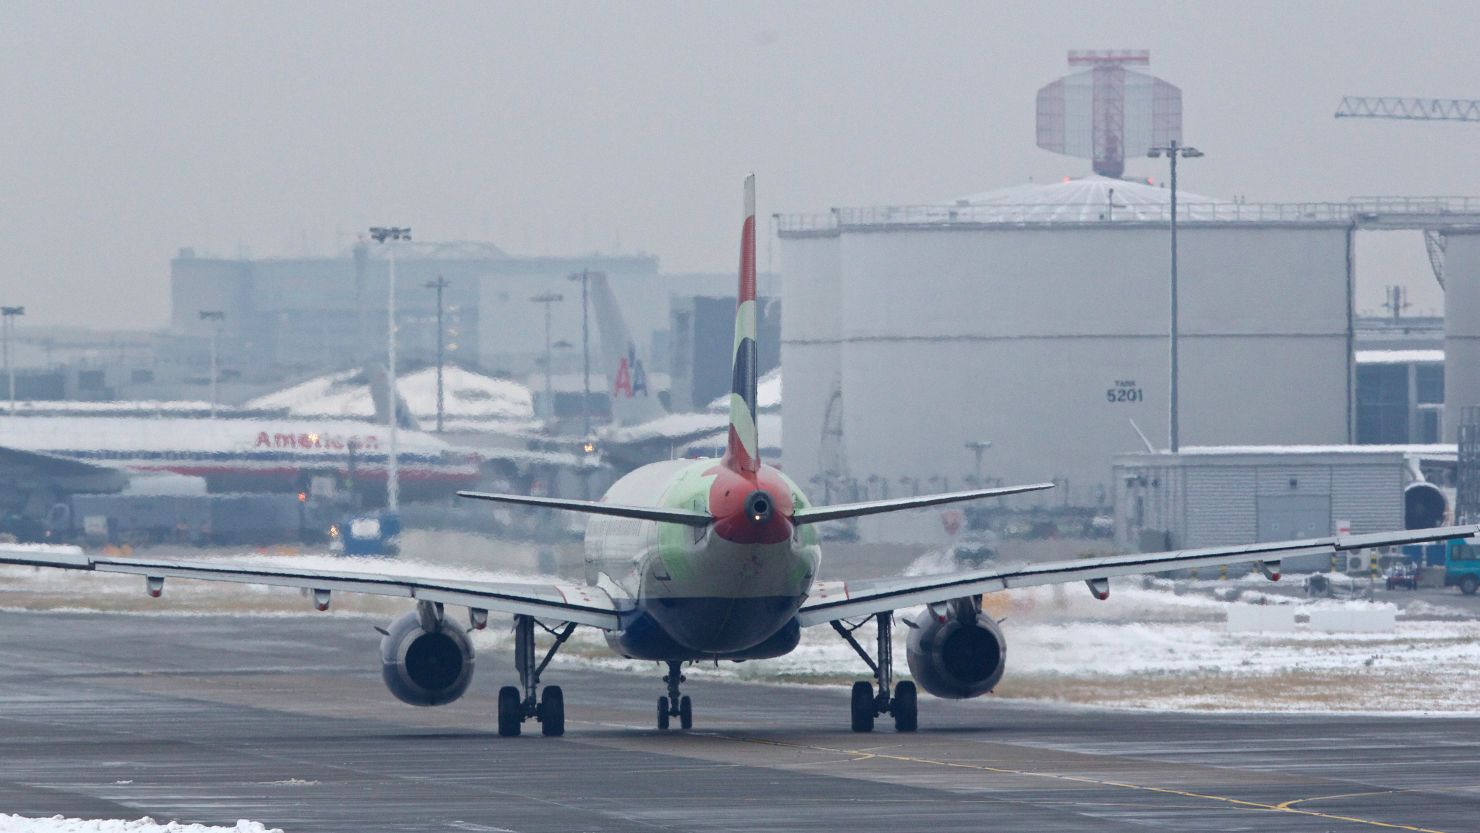 A British Airways plane taxis on the runway at Heathrow airport in west London on January 21, 2013.